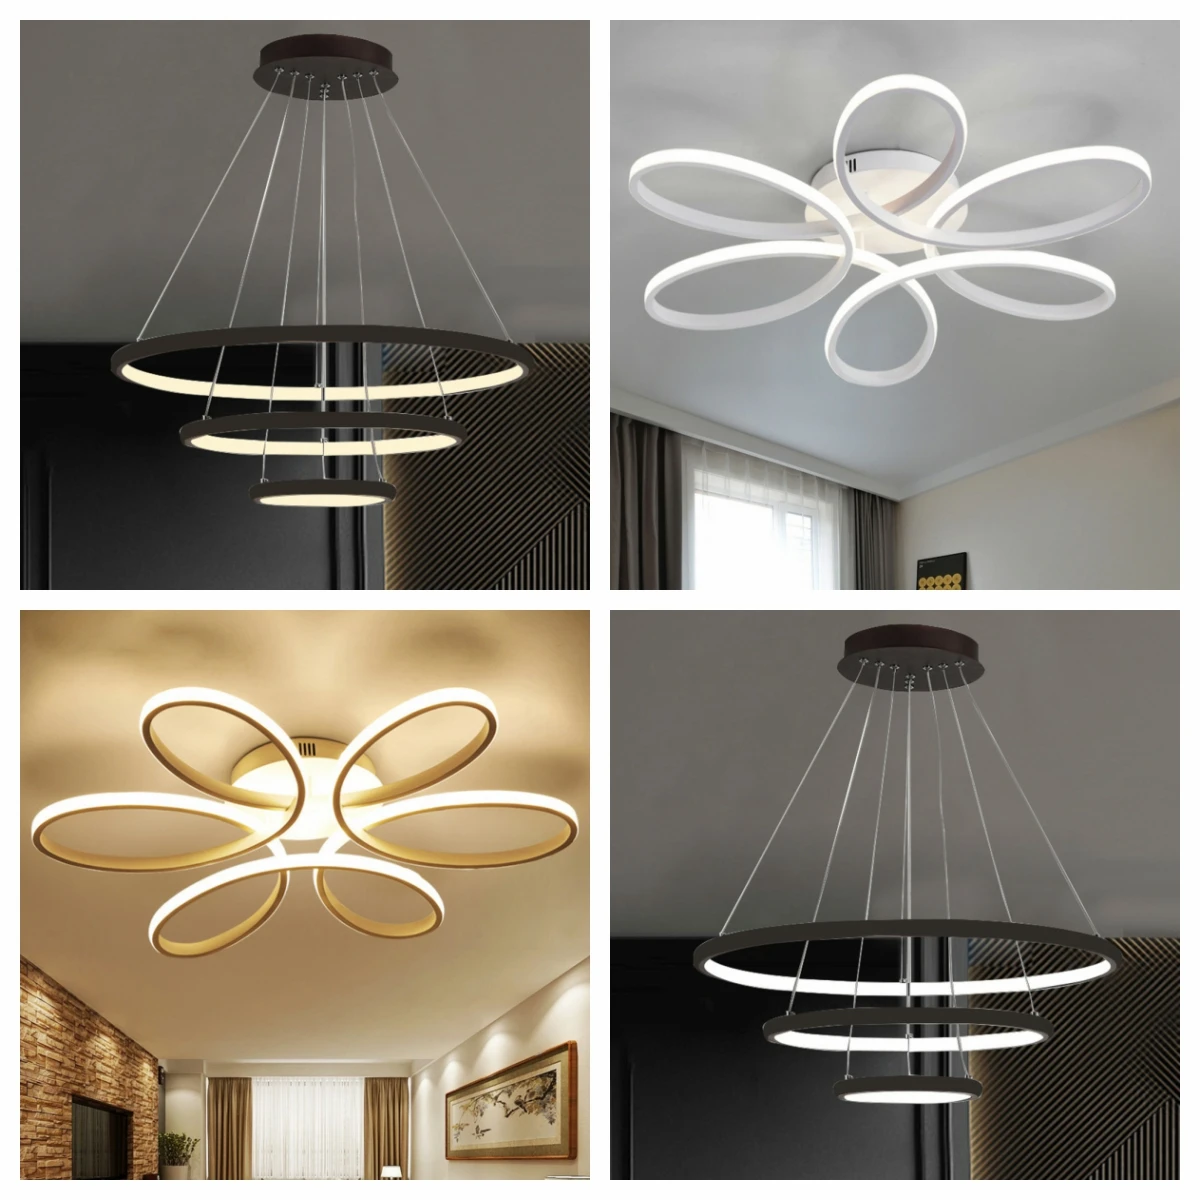 Ordic luxury hanging lamp ceiling lights for bedroom bedside home decoration chandelier thumb200